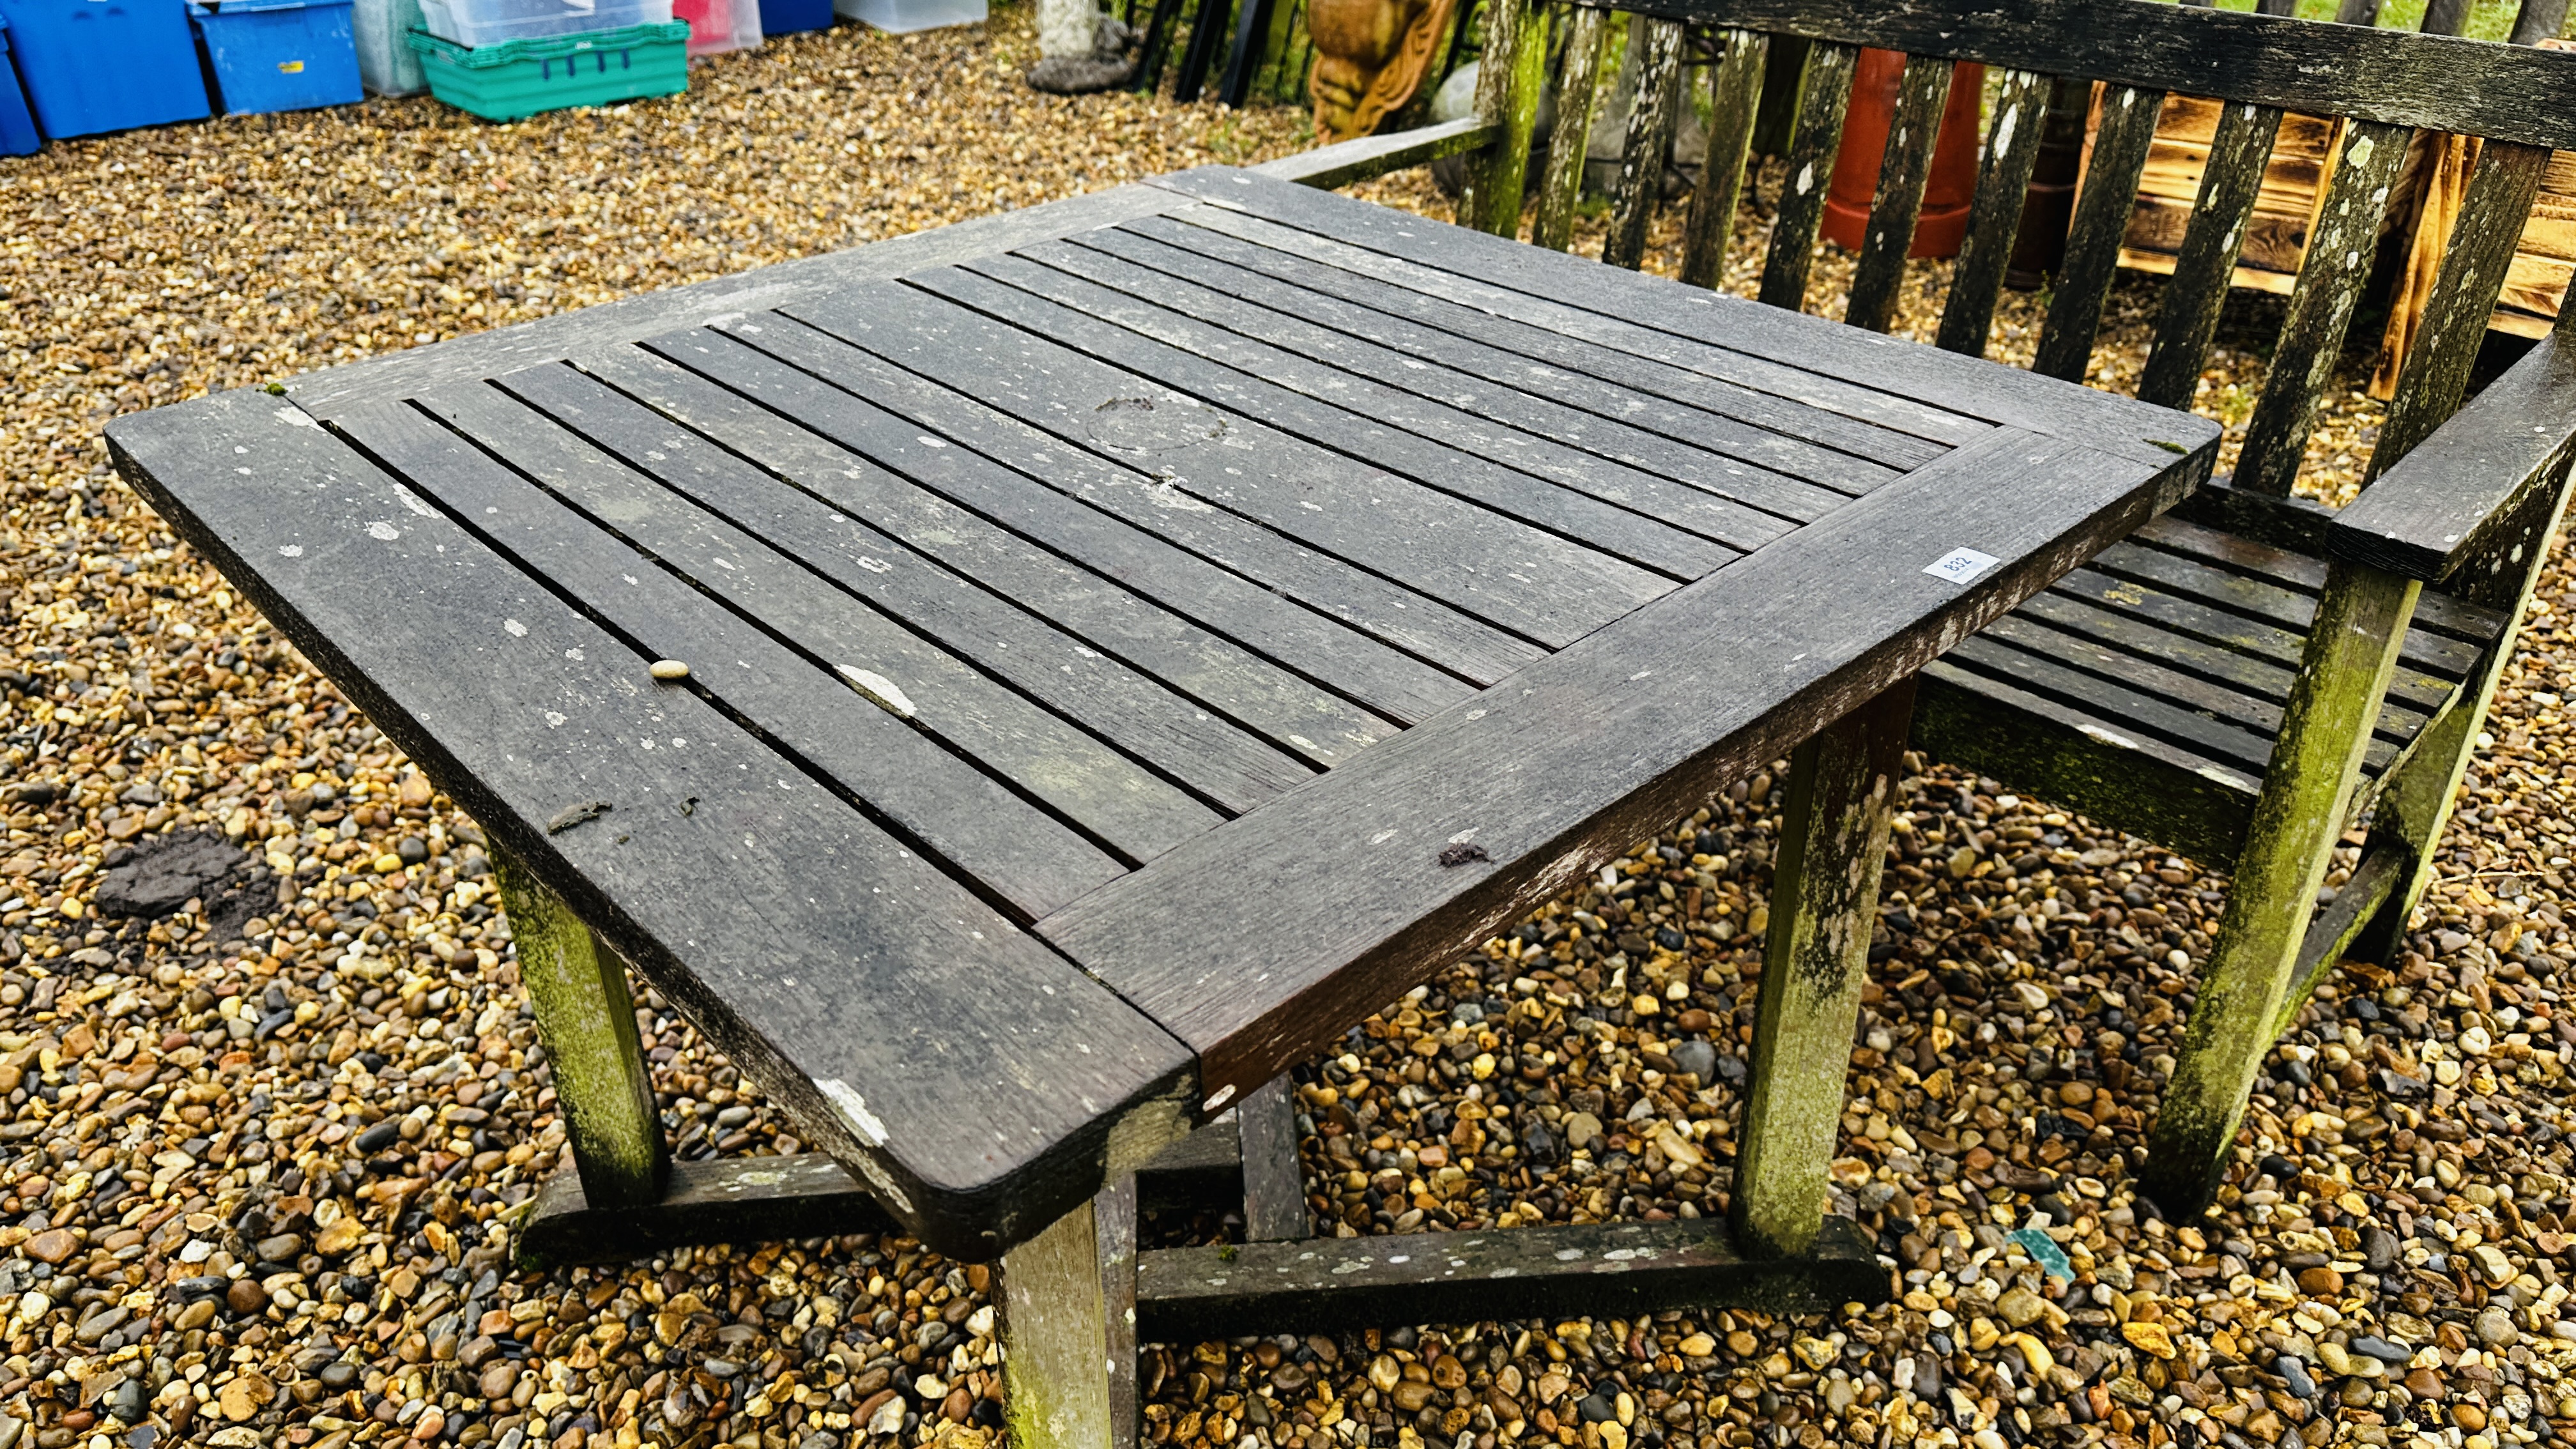 A HARDWOOD GARDEN BENCH LENGTH 120CM AND HARDWOOD GARDEN TABLE - WEATHERED CONDITION, 90 X 90CM. - Image 2 of 7